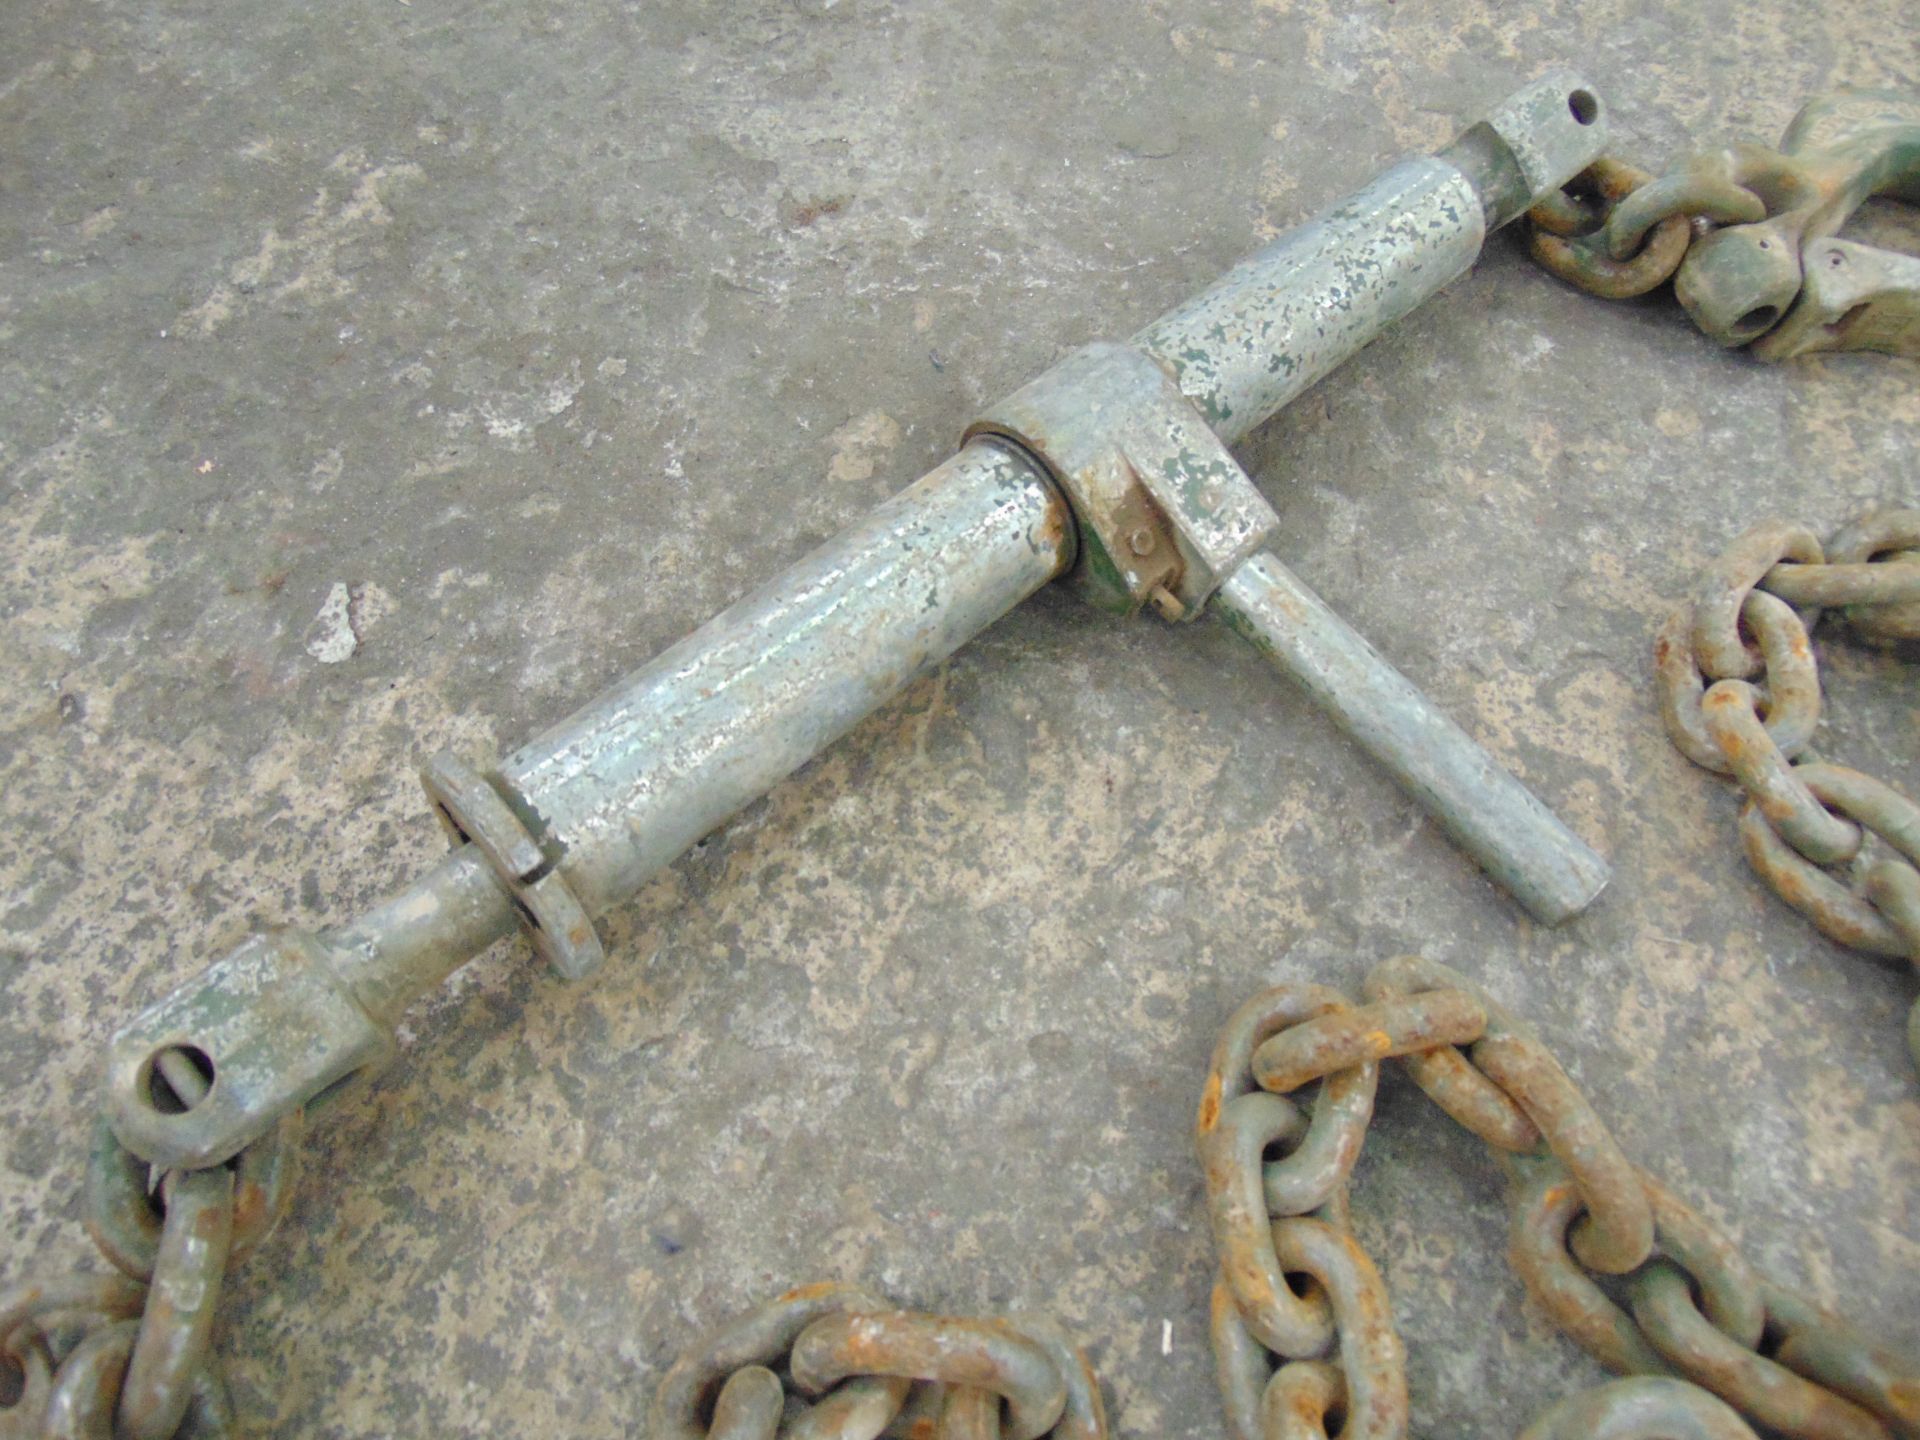 Very Heavy Duty RUD Lashing Chain with Ratchet Tensioner - Image 3 of 5